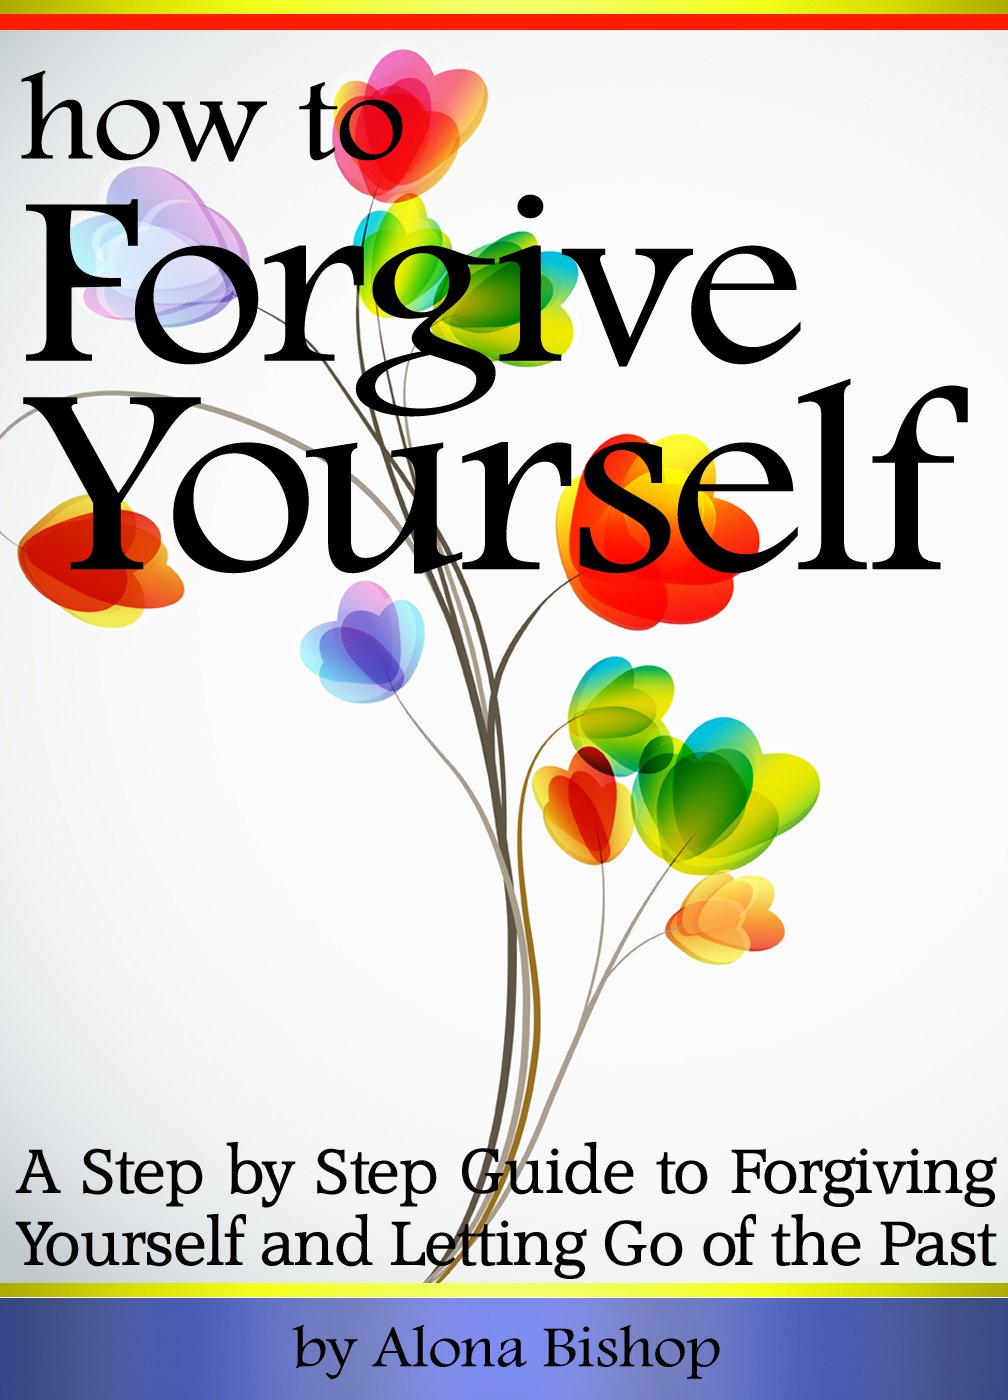 How to Forgive Yourself by Alona Bishop